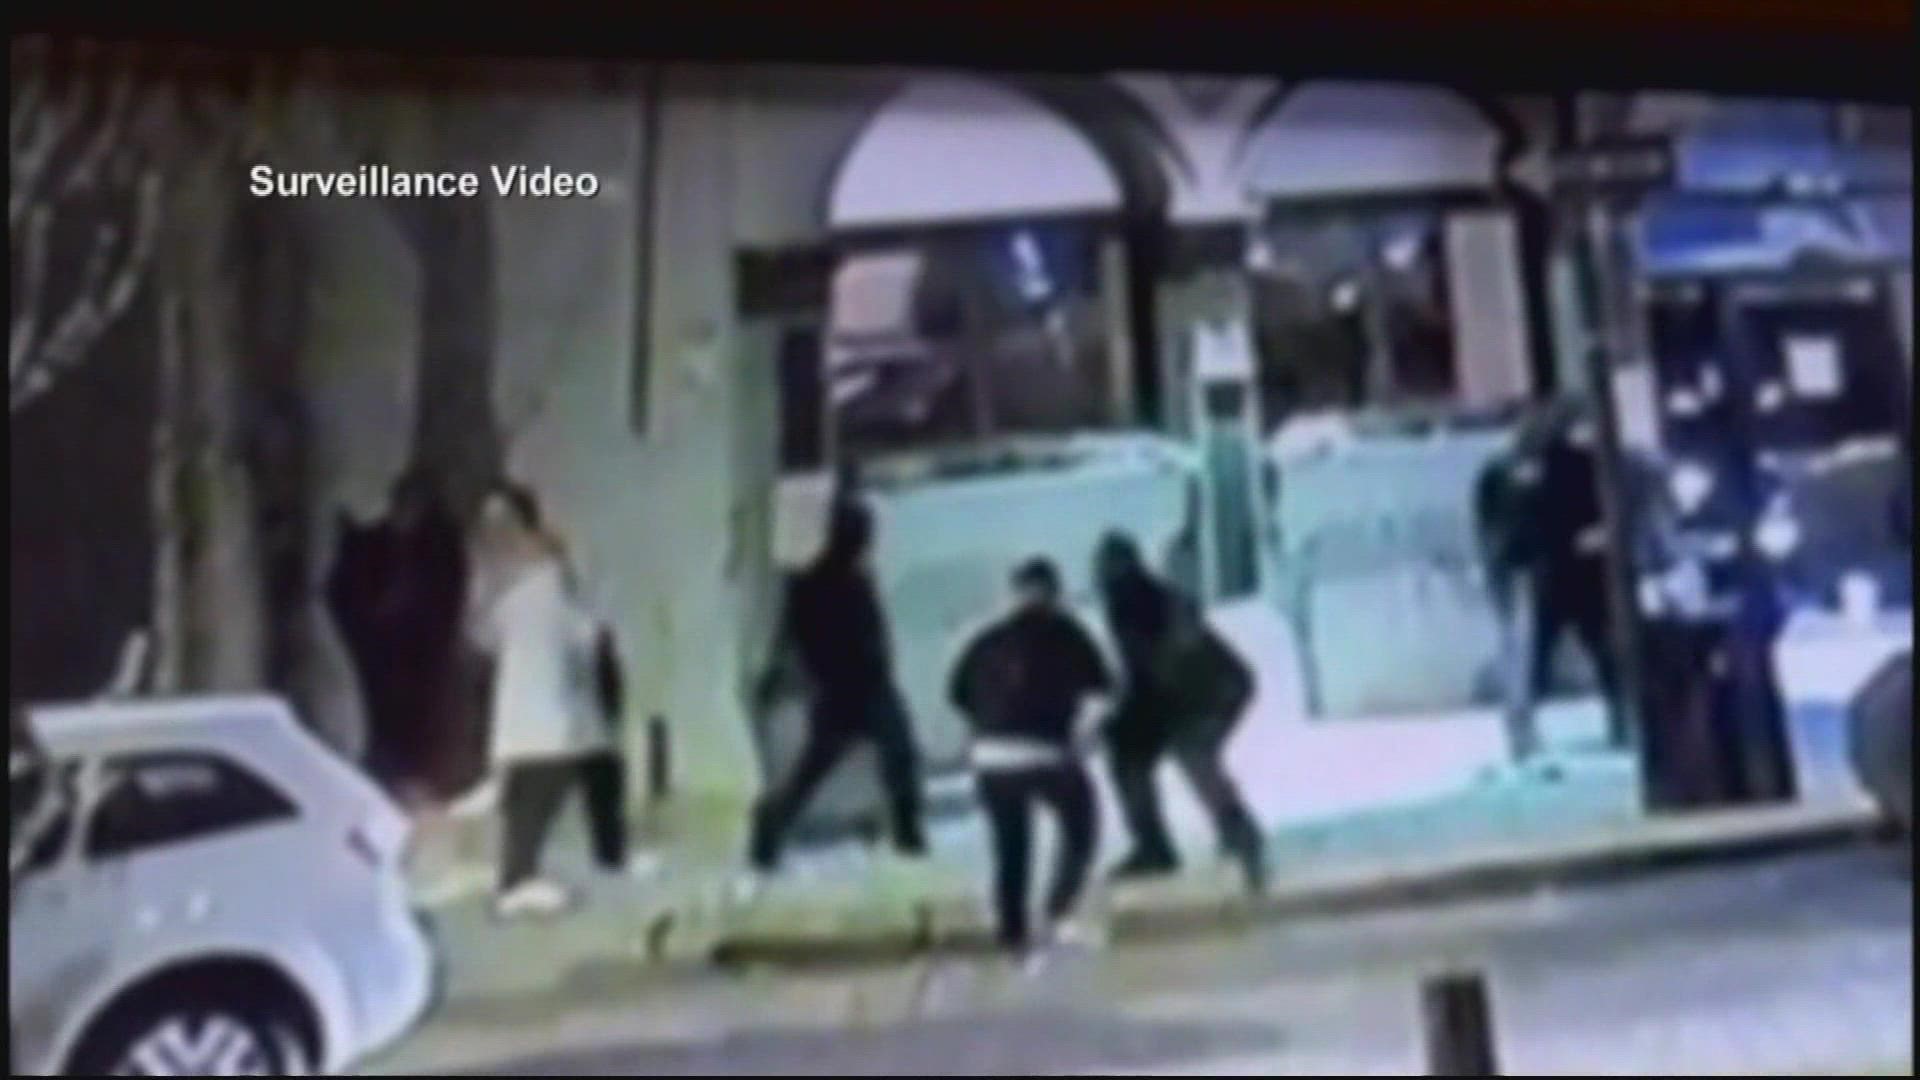 Surveillance video captured the encounter outside the Tabu Bar & Lounge in Philadelphia on April 16.